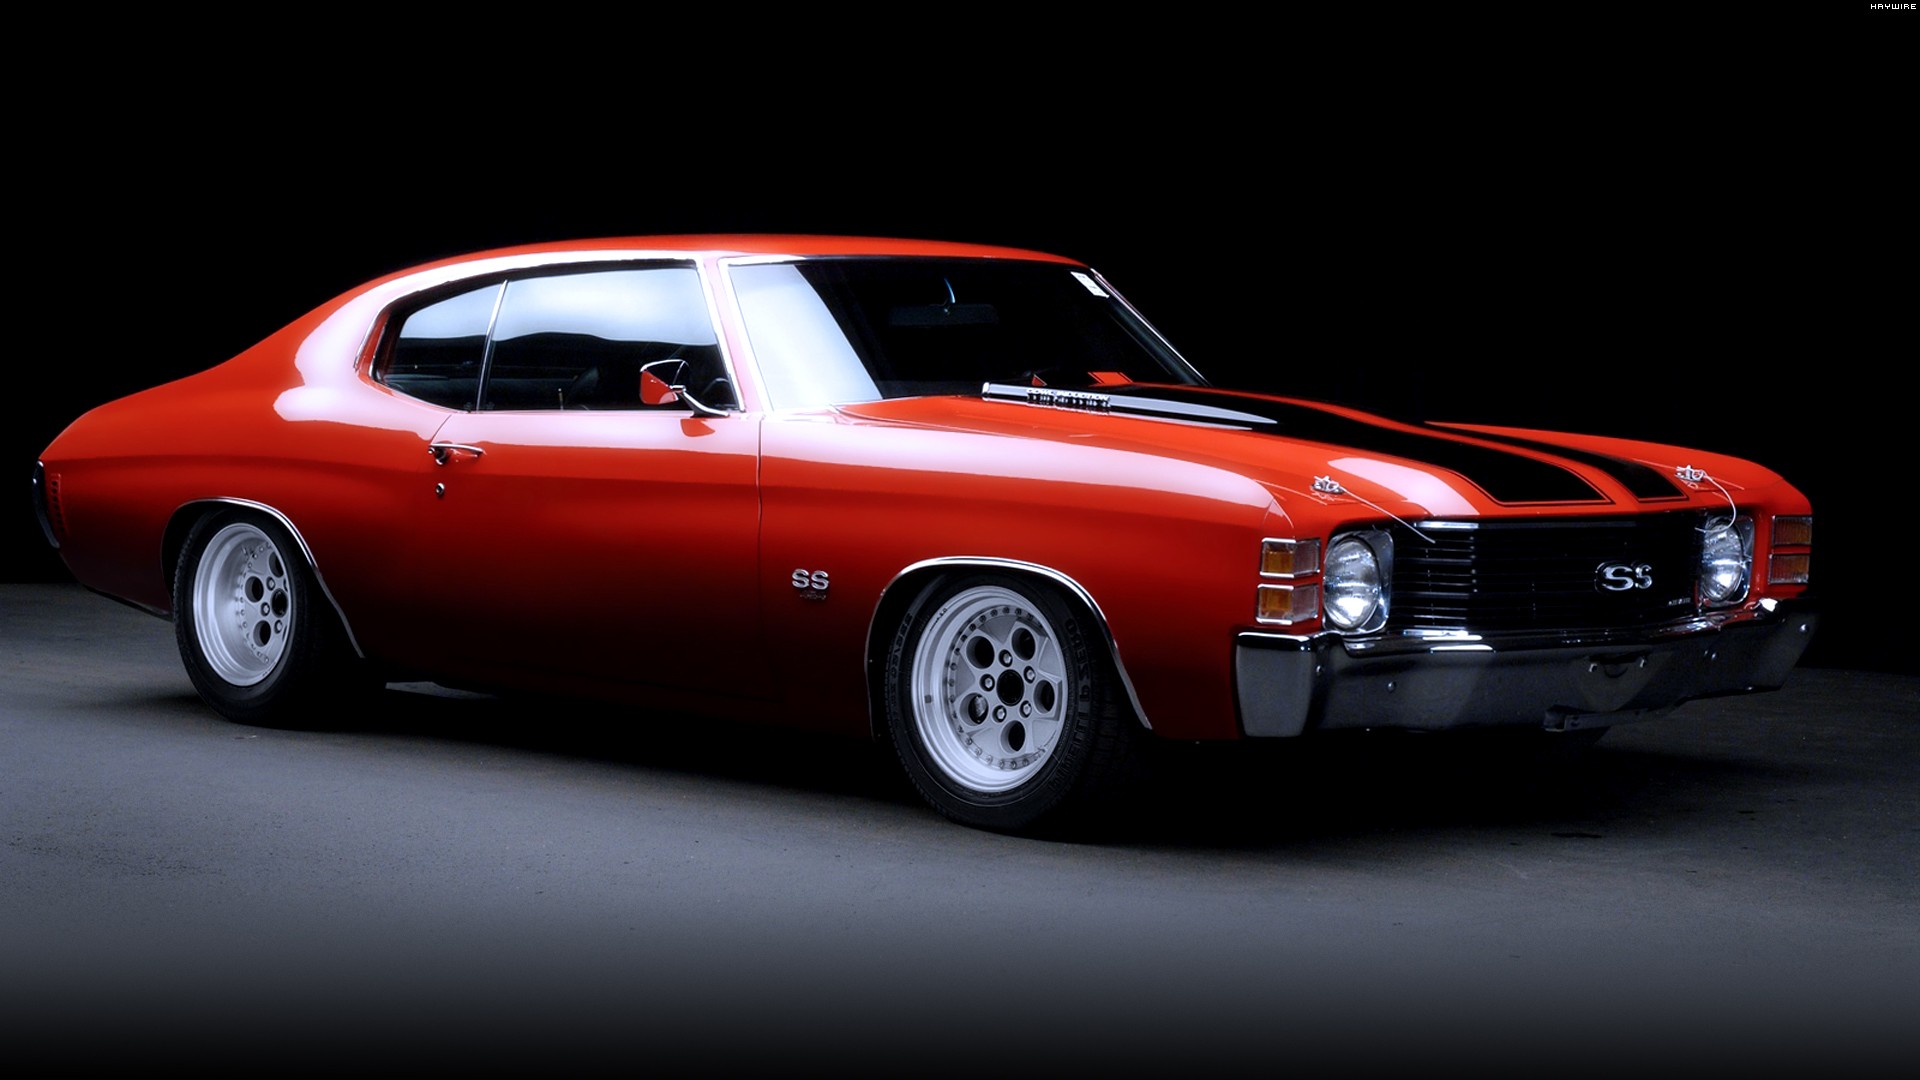 American Muscle Cars HD Wallpaper New Car Nation